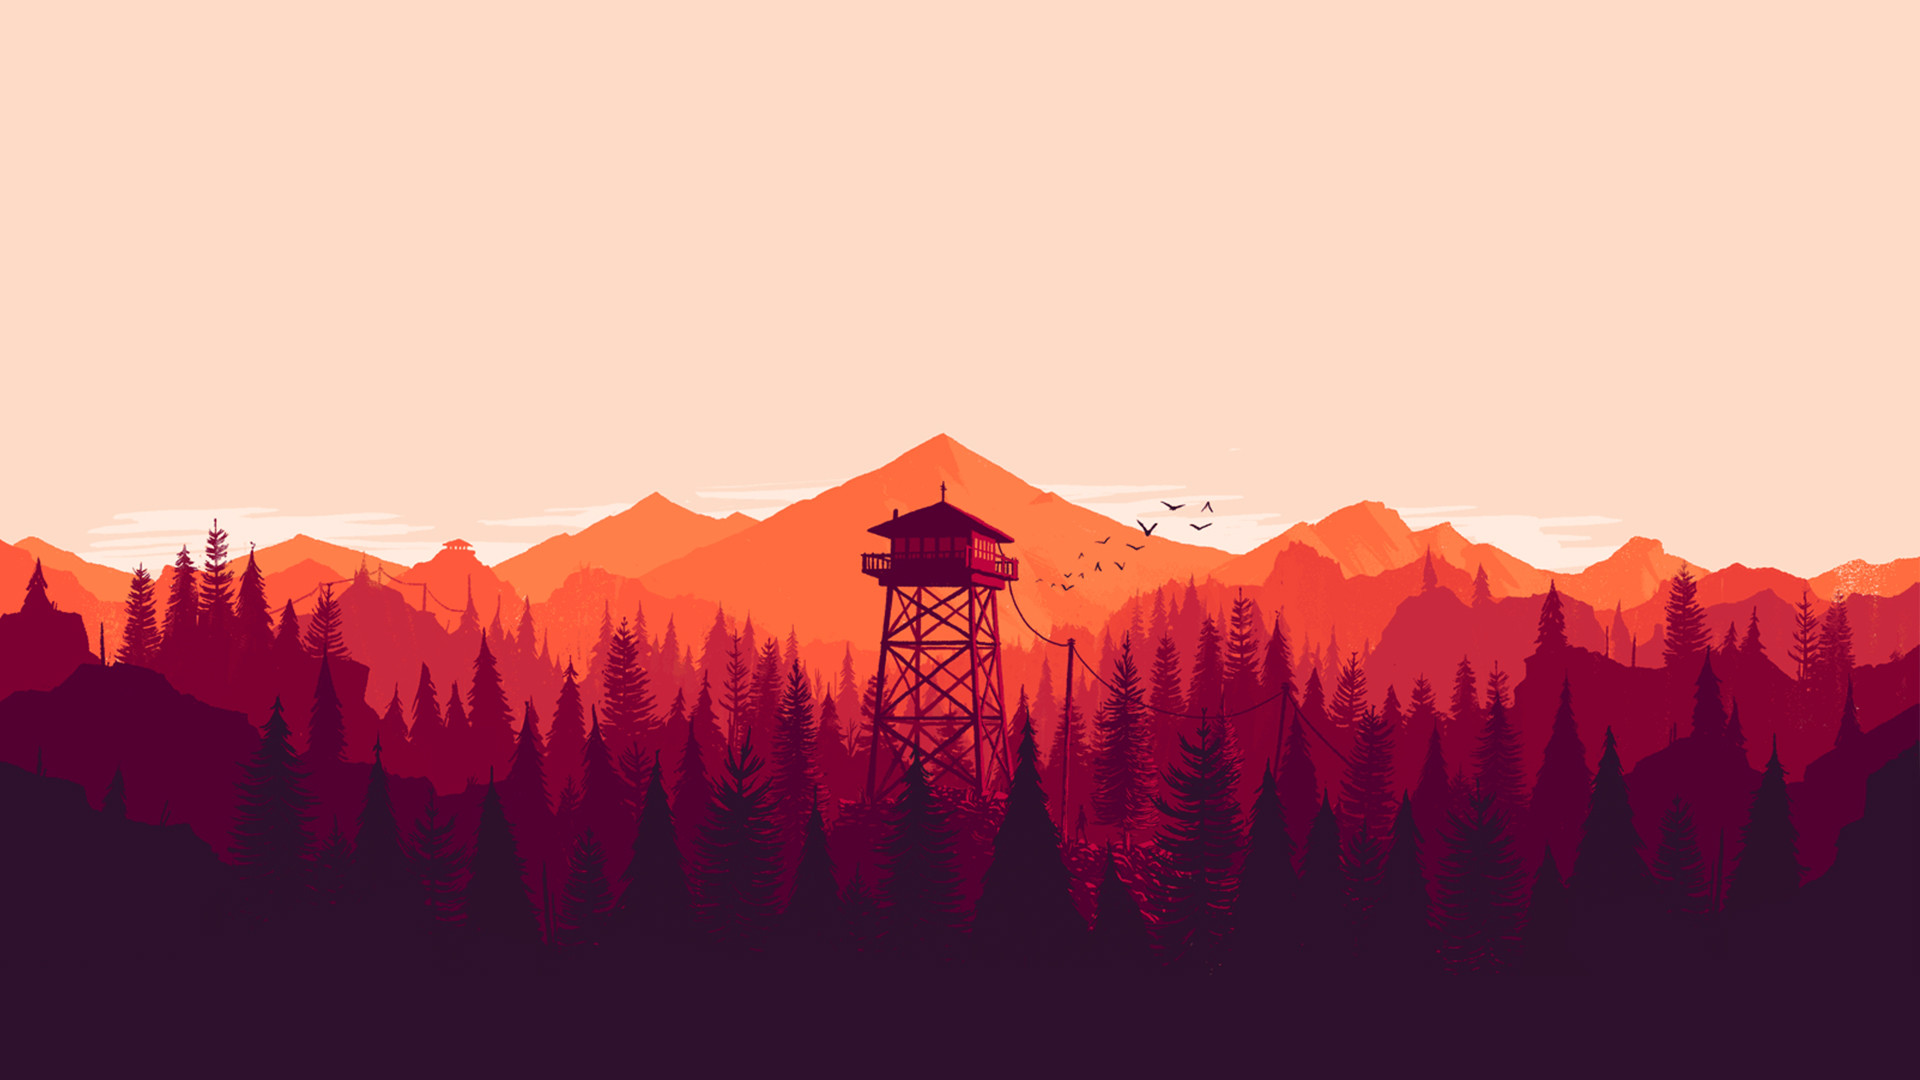 Free Download Firewatch 1980x1080 Wallpapers 19x1080 For Your Desktop Mobile Tablet Explore 31 1980x1080 Wallpaper 1980x1080 Wallpapers Hd Hd Wallpapers 1980x1080 Hd Celebrity Wallpaper 1980x1080